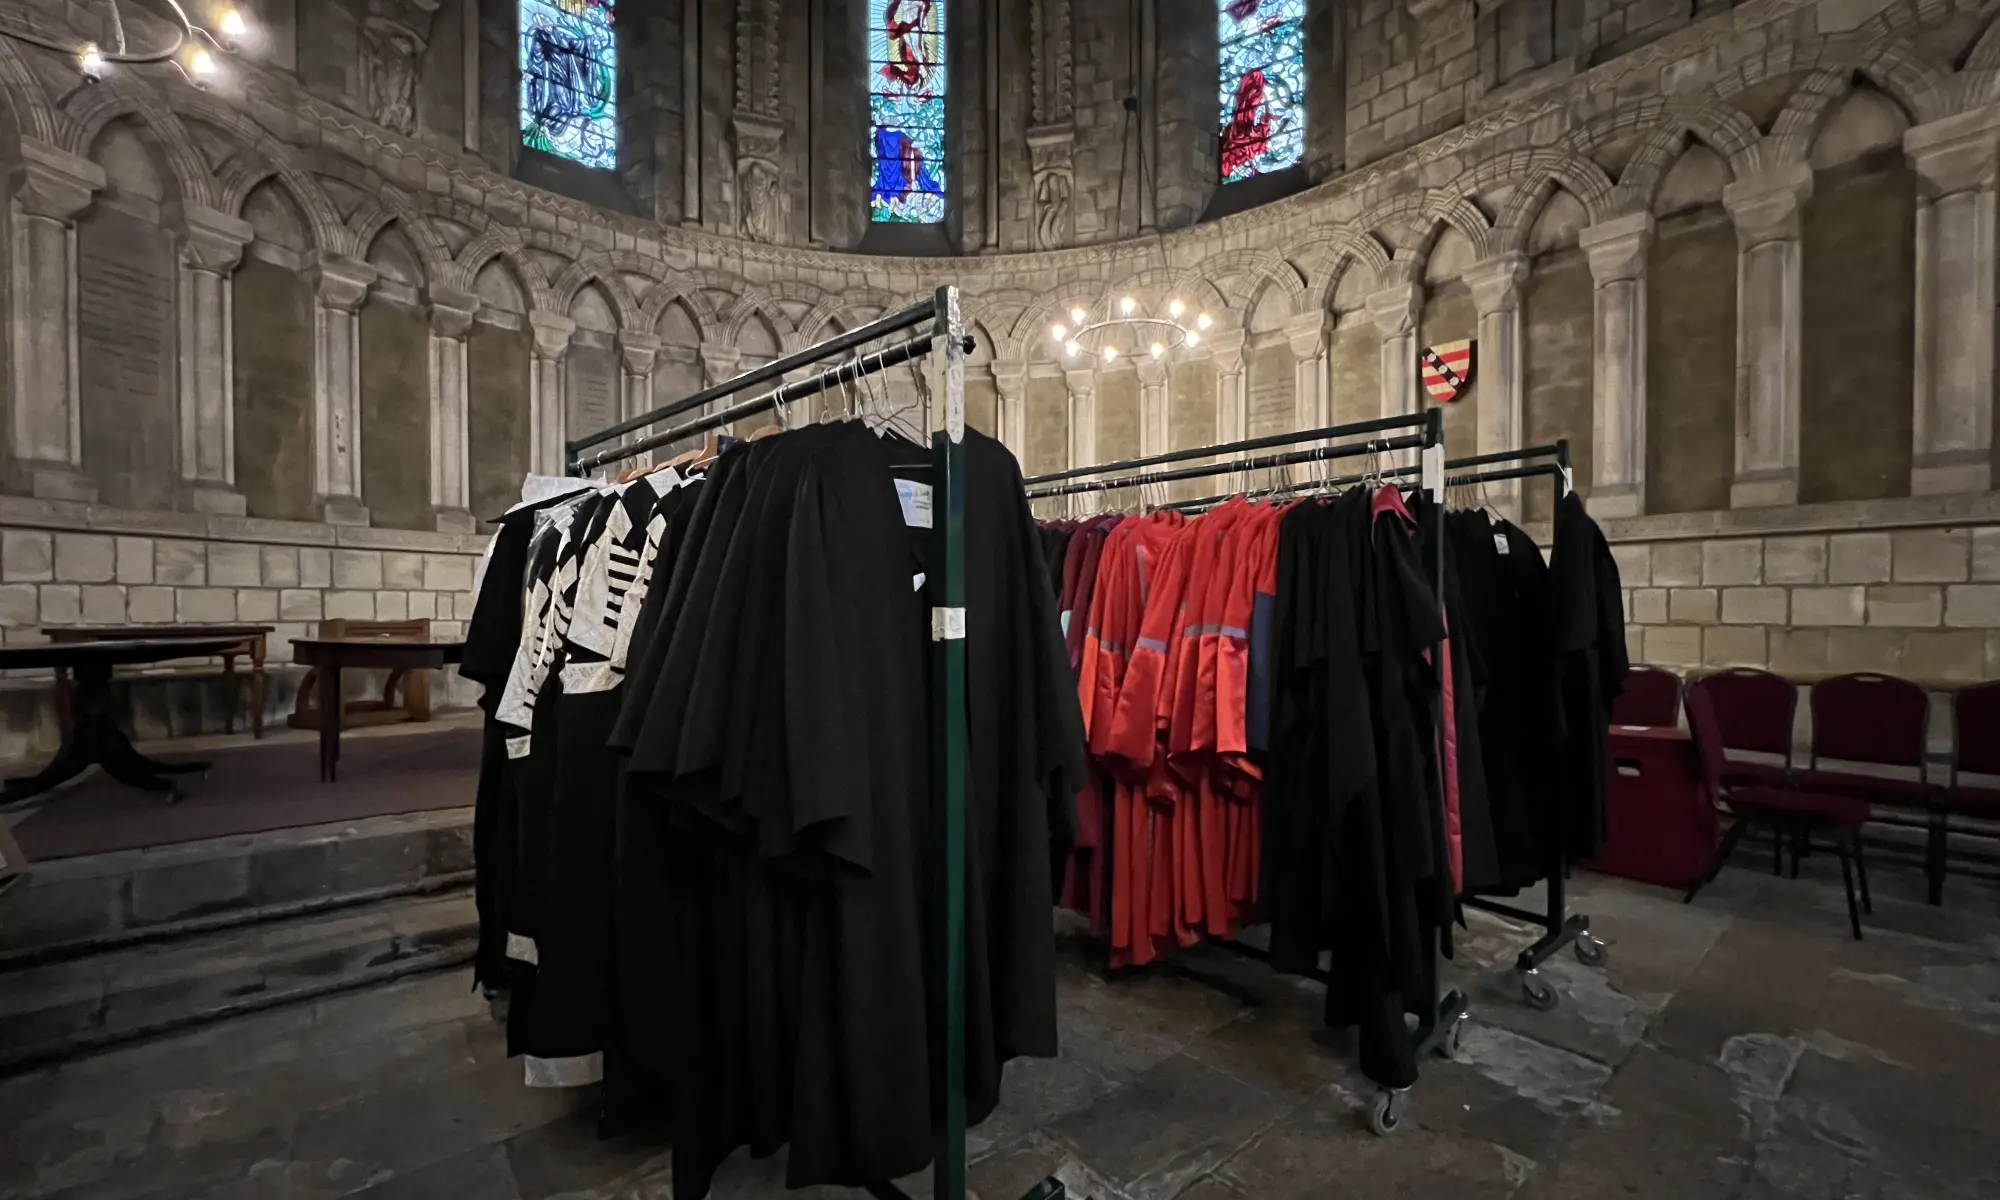 Matriculation Robes in Durham Cathedral's Chapter House